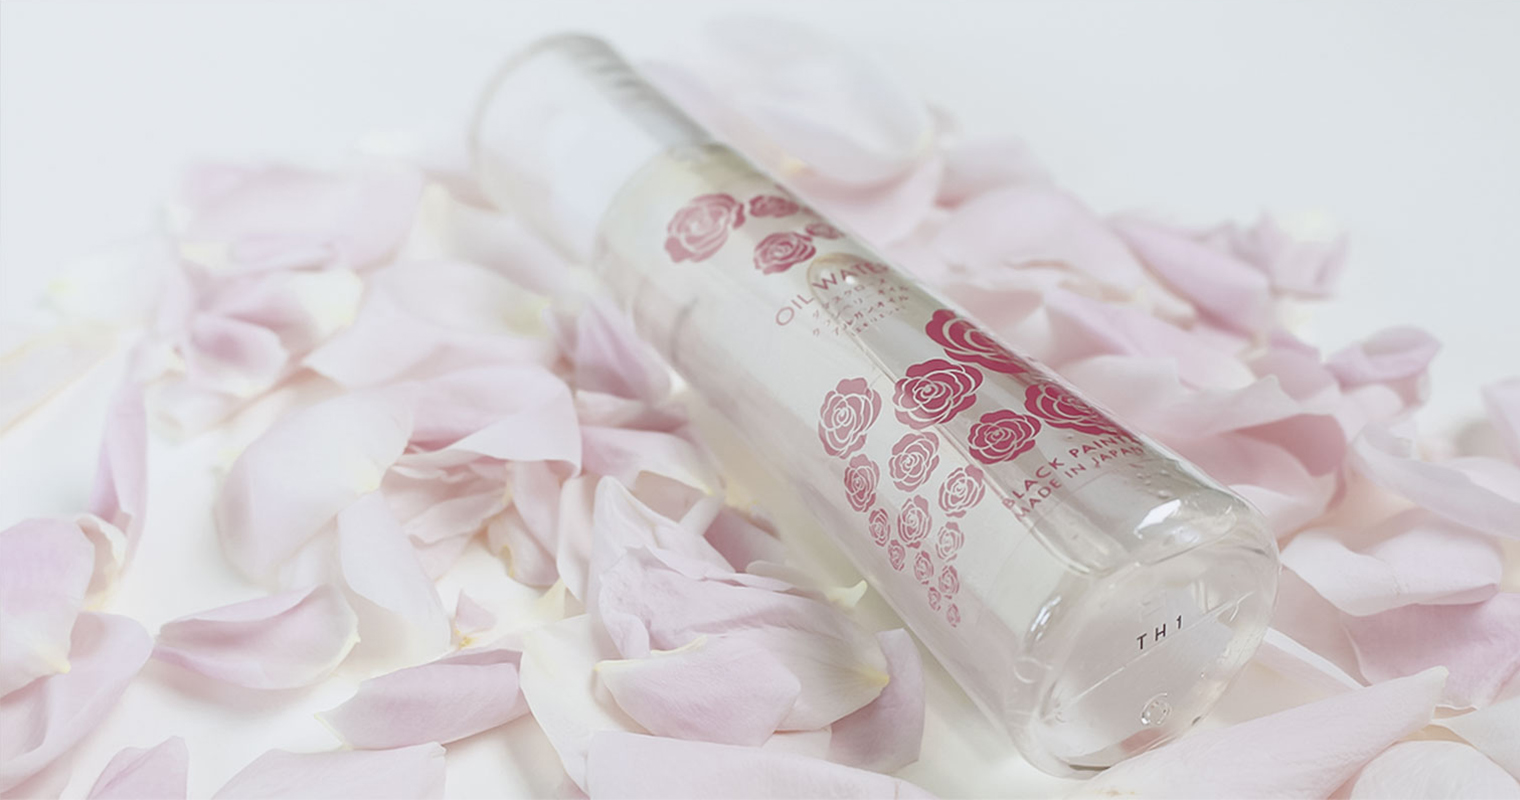 oil water rose bottle with rose petals